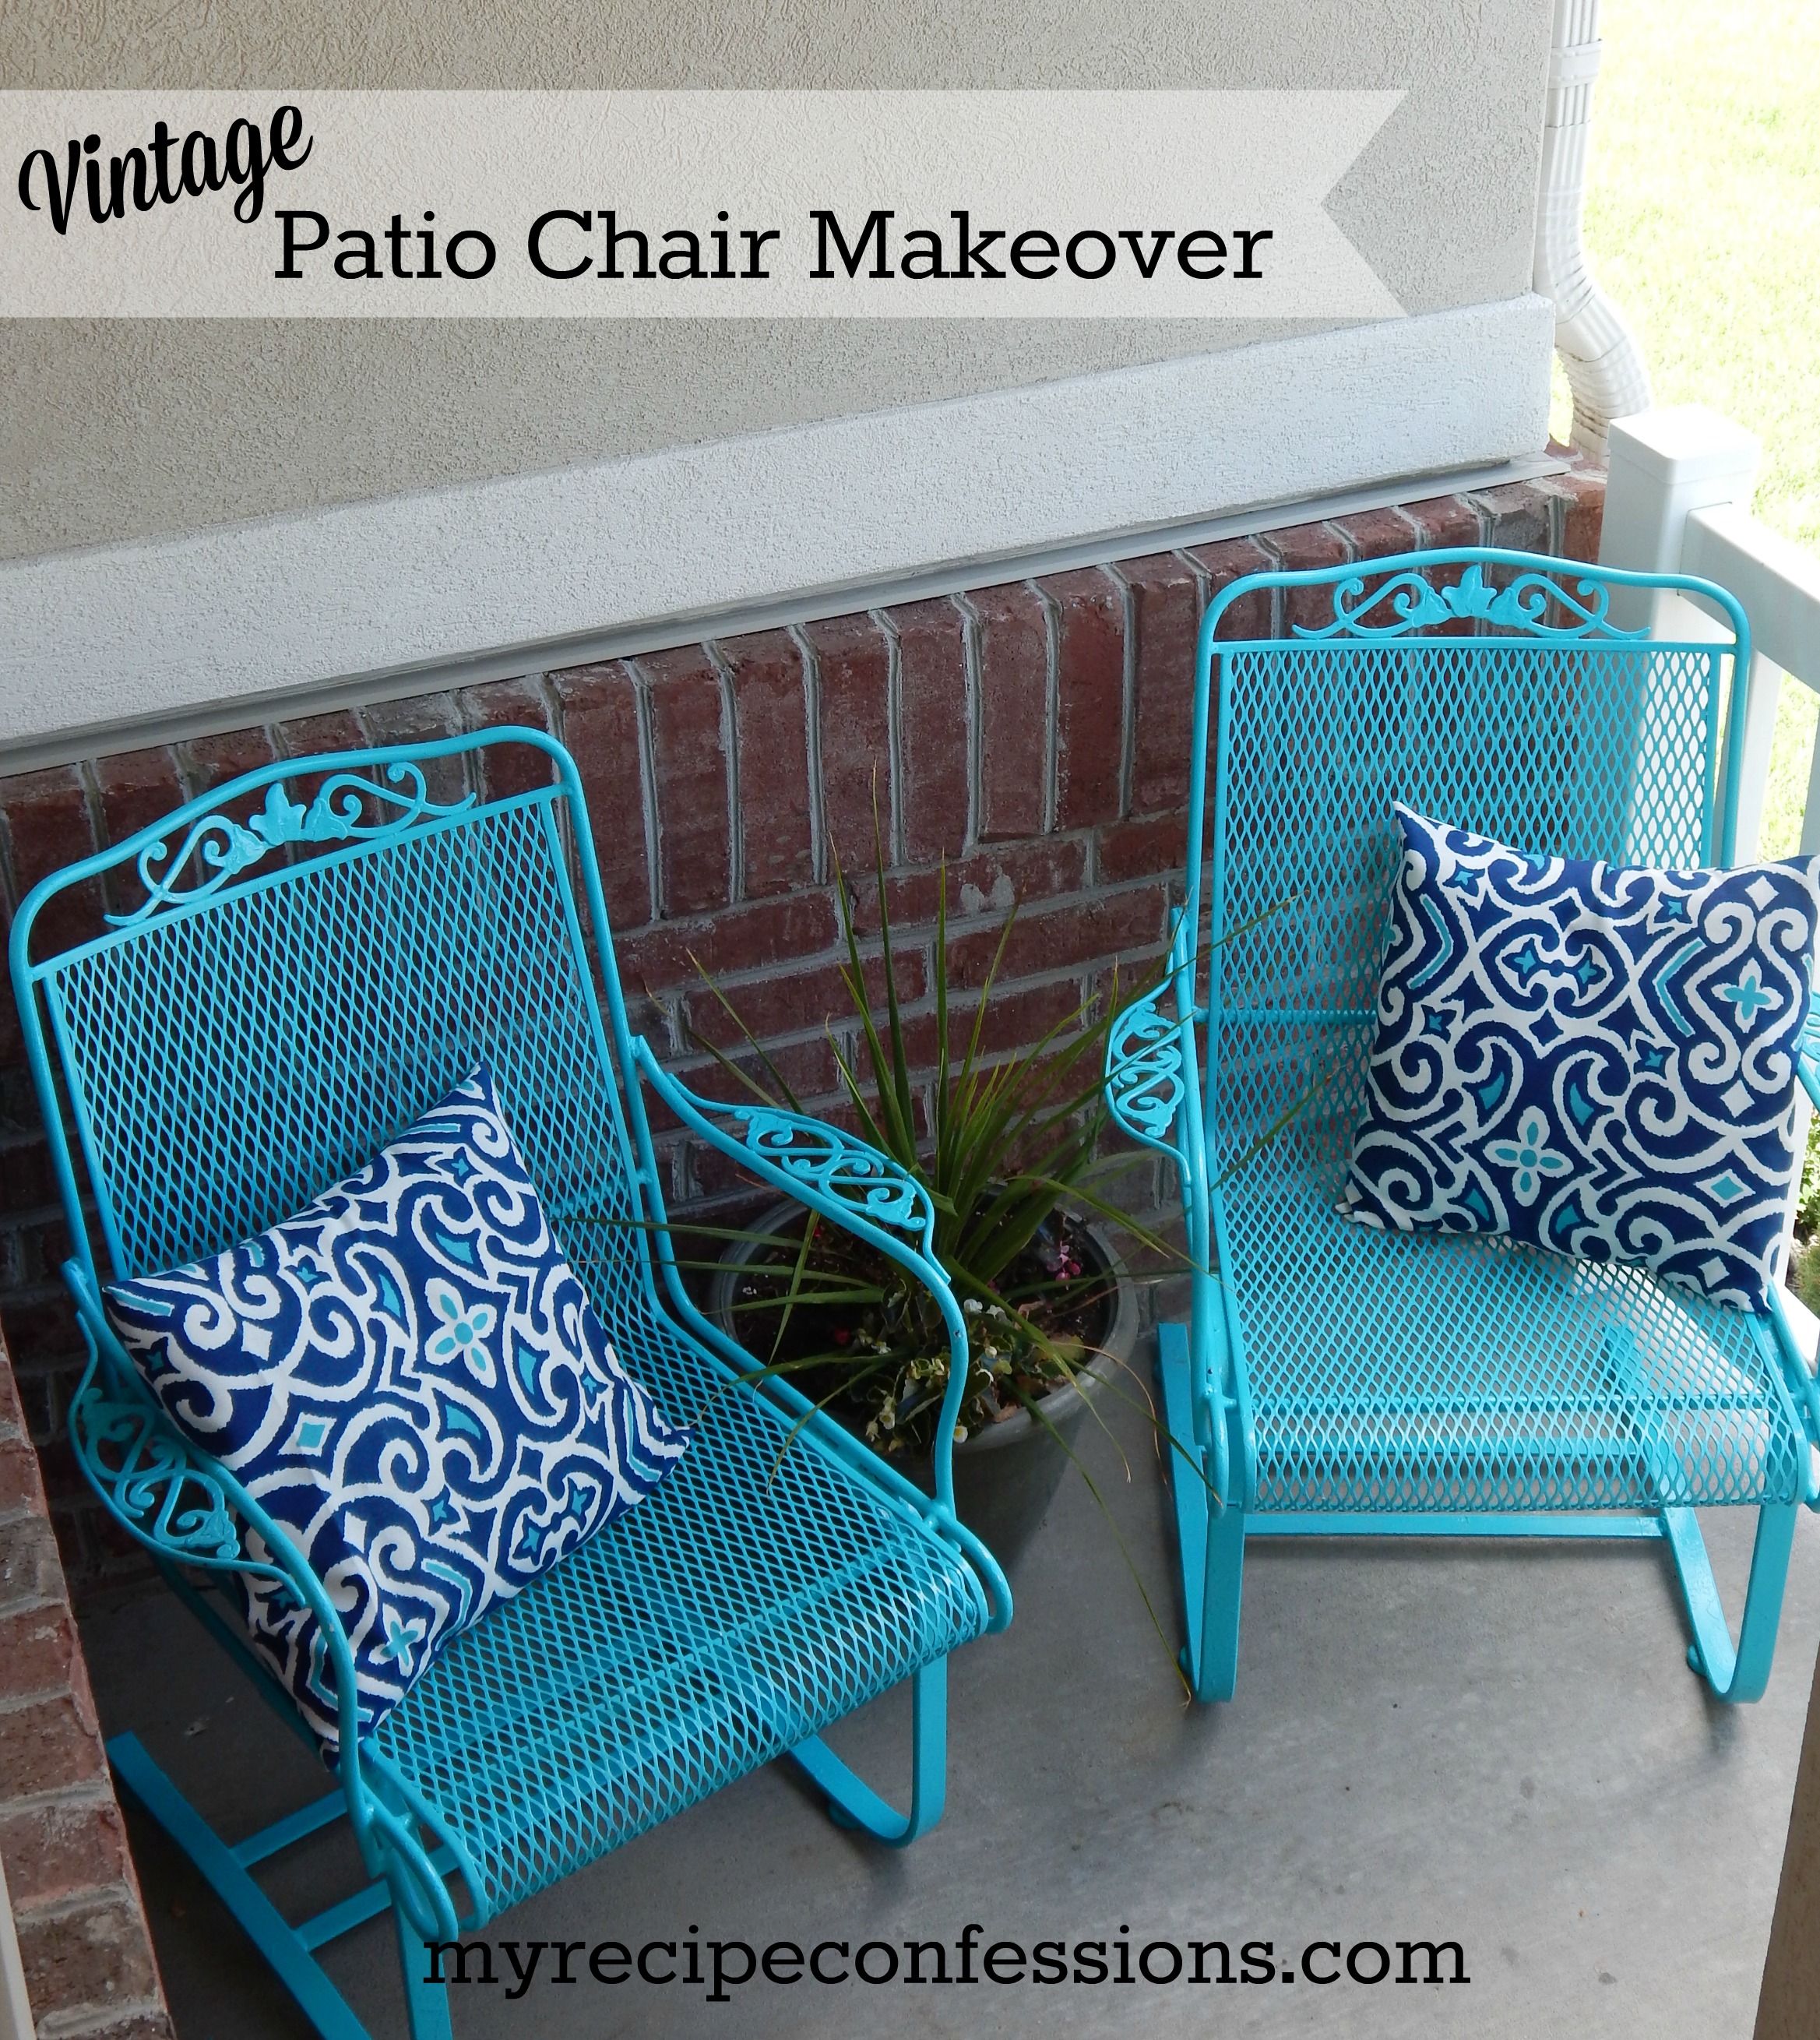 VIntage Patio Chair Makeover